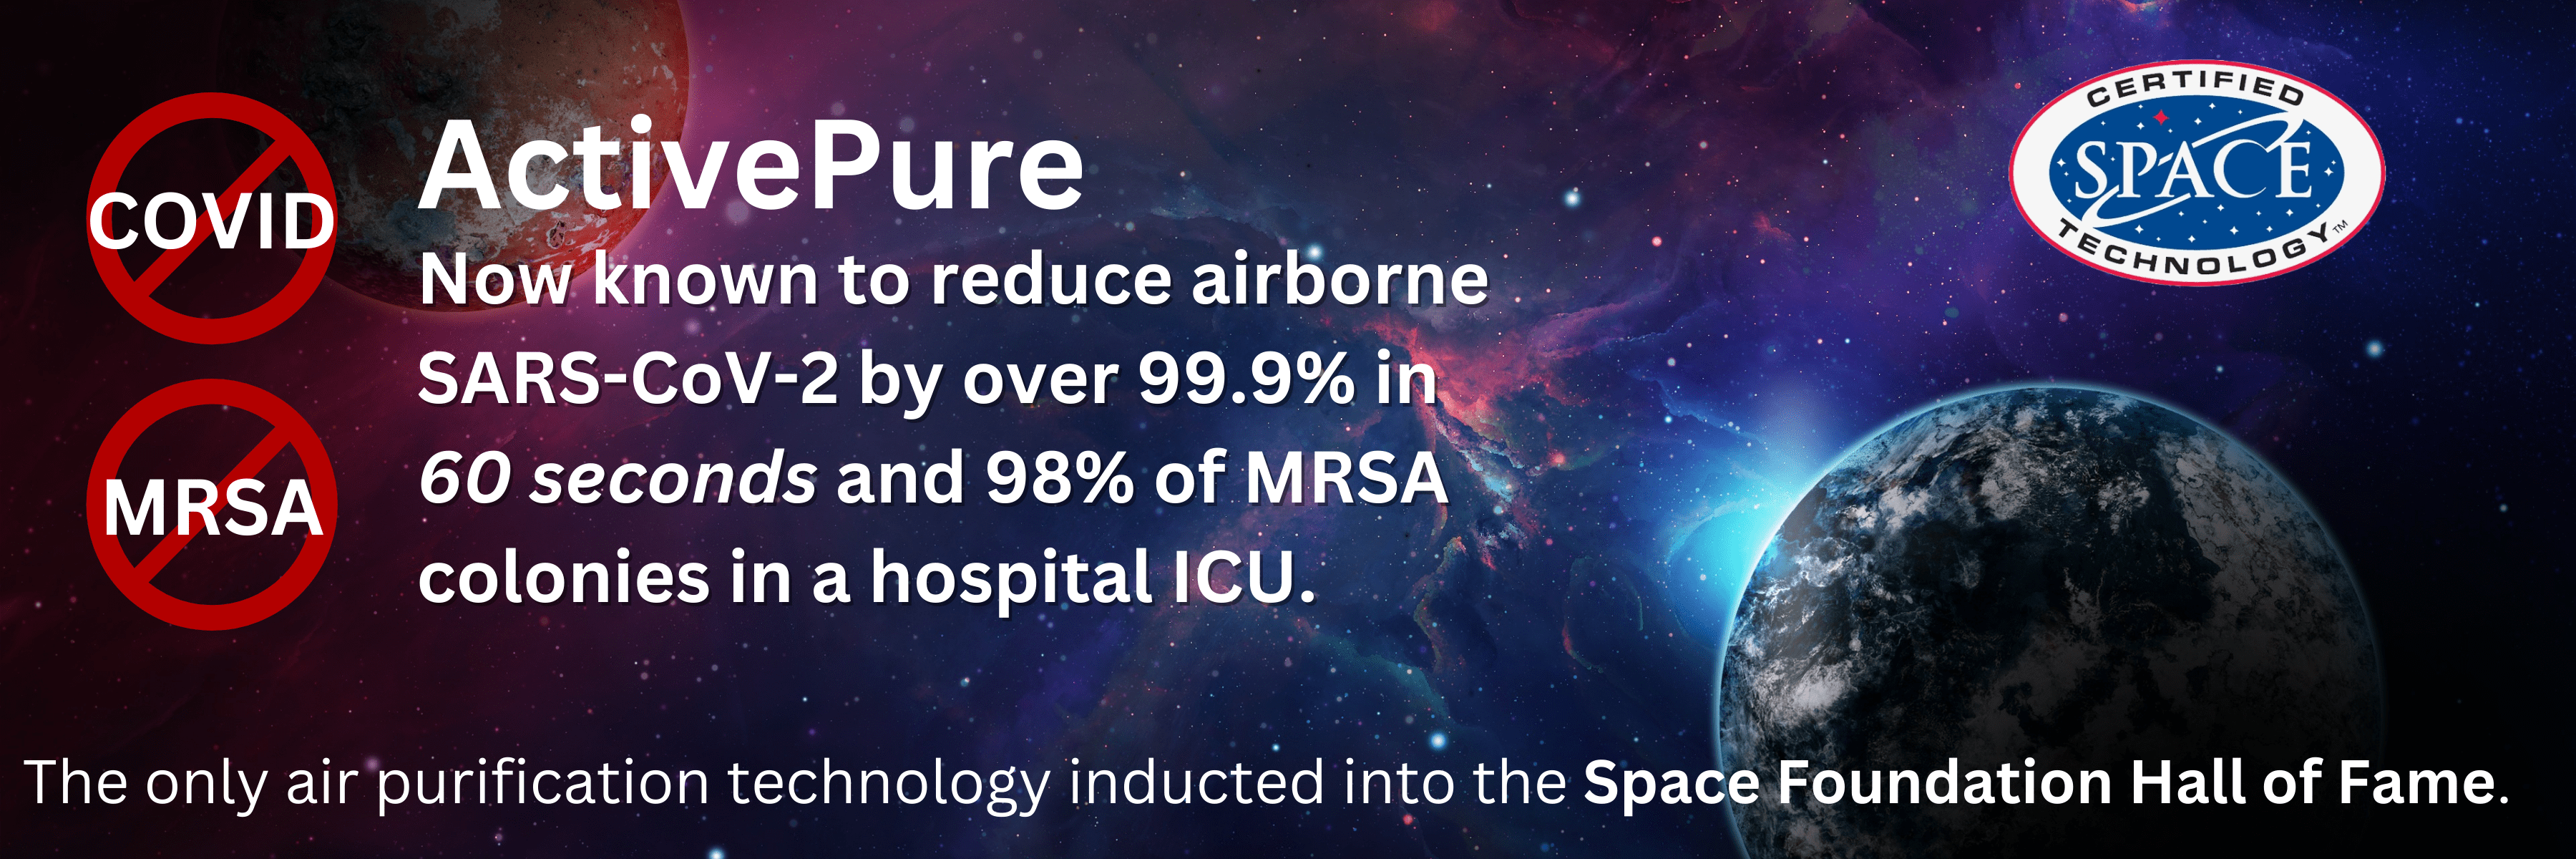 active pure is now known to reduce airborne sars-cov-2 virus by over 99.9% in 60 seconds and 98% of mrsa bacteria colonies in a hospital icu methylcillin 